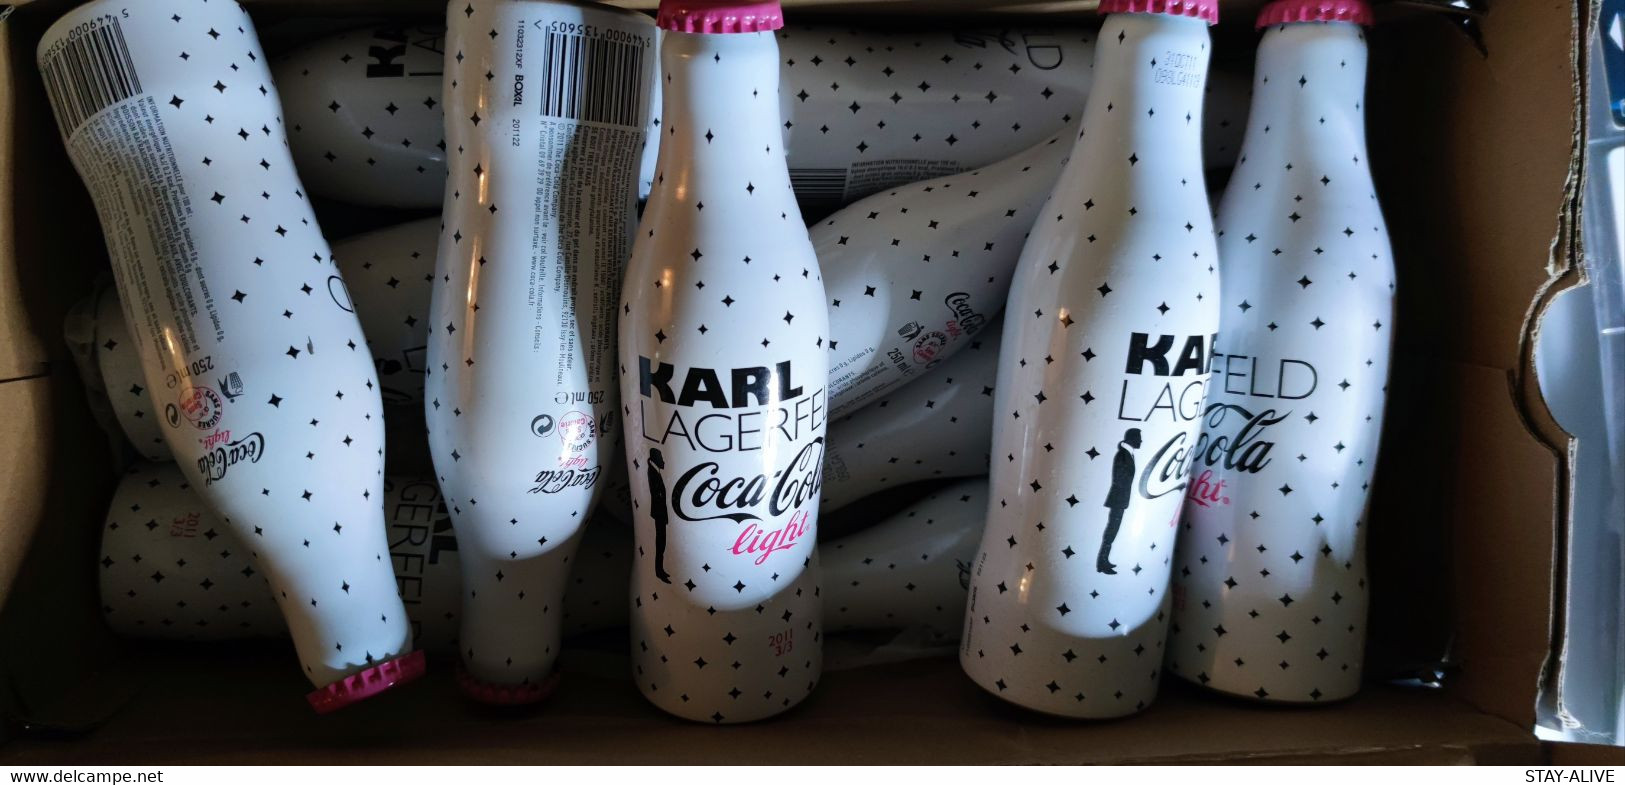 LOT OF 12 BOTTLES :  KARL LAGERFELD COCA-COLA LIGHT ( LIMITED EDITIONS )